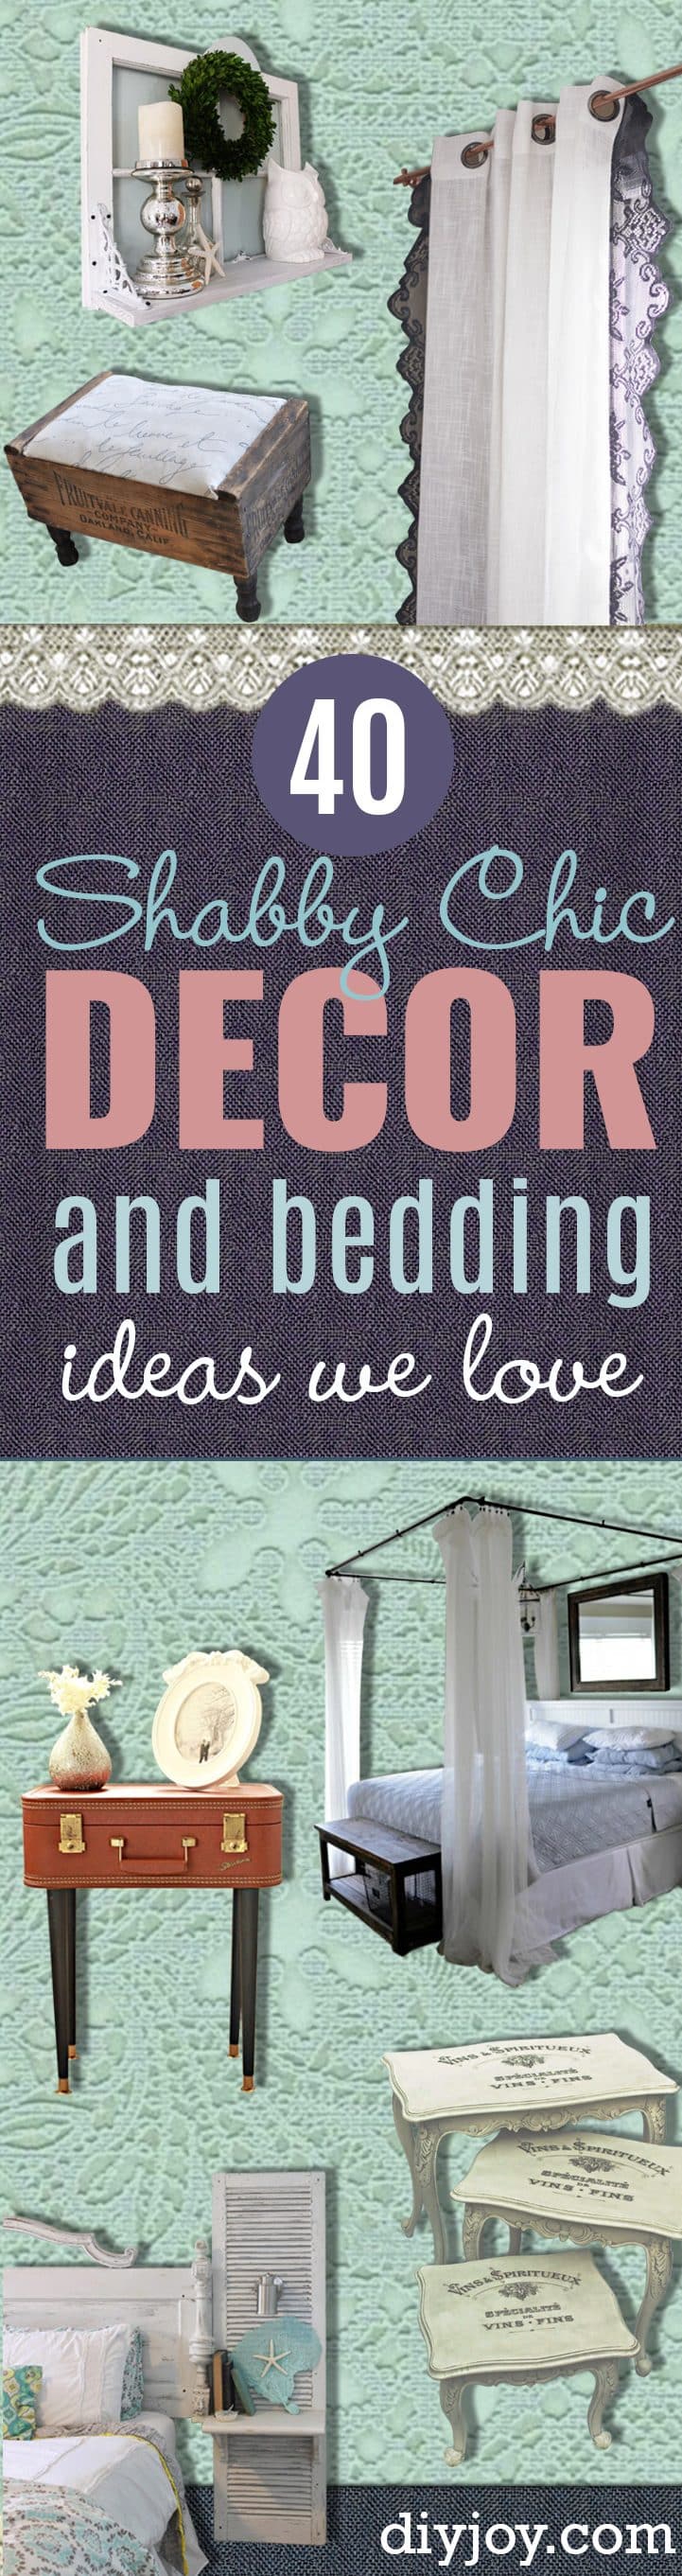 Shabby Chic Decor and Bedding Ideas - Rustic, Country French and Romantic Vintage Bedroom, Living Room and Kitchen Country Cottage Furniture and Home Decor Ideas. Step by Step Tutorials and Instructions #rusticdecor #shabbychic